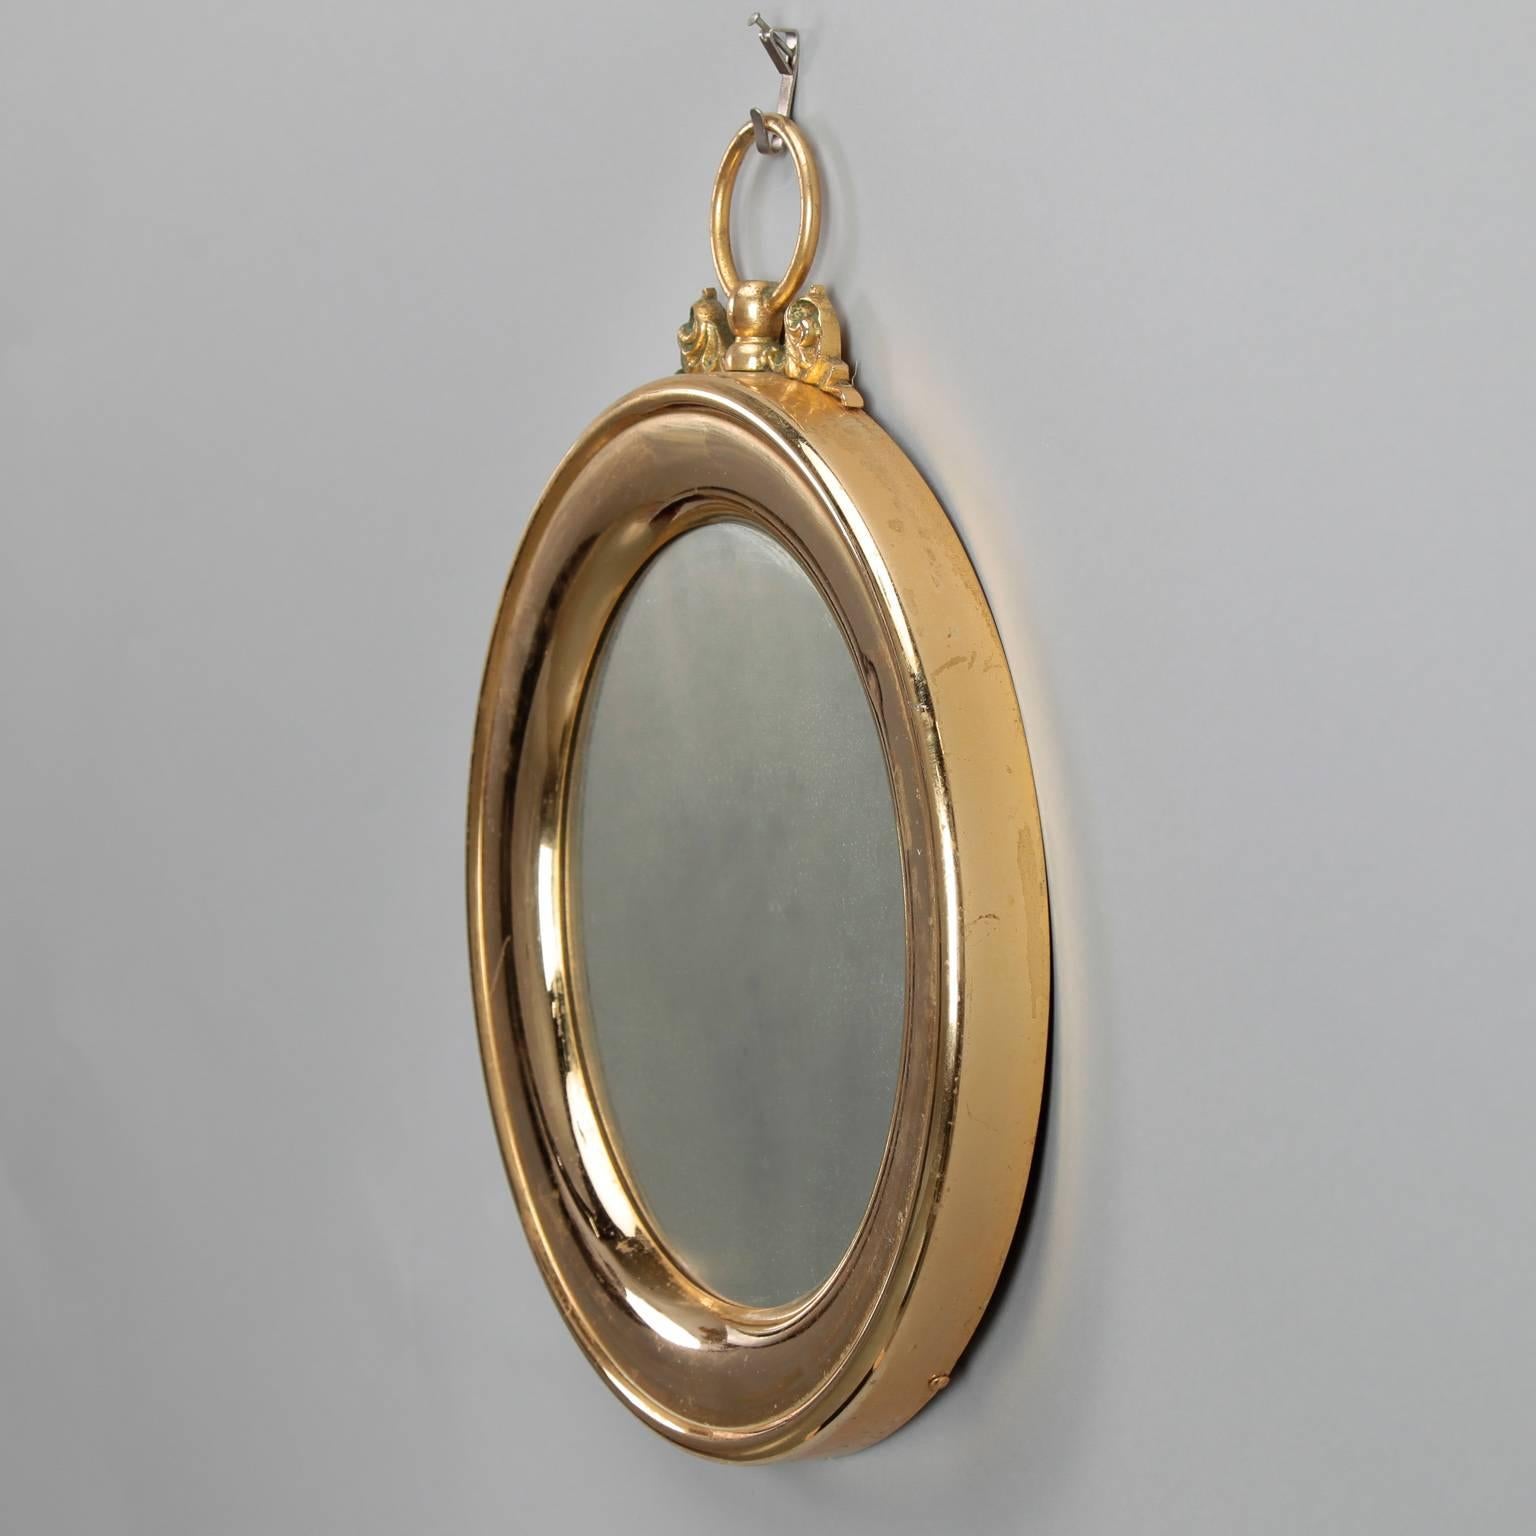 Polished brass framed round wall mirror has the whimsical shape of a stop watch, circa 1950s. Mirror is 9” diameter.